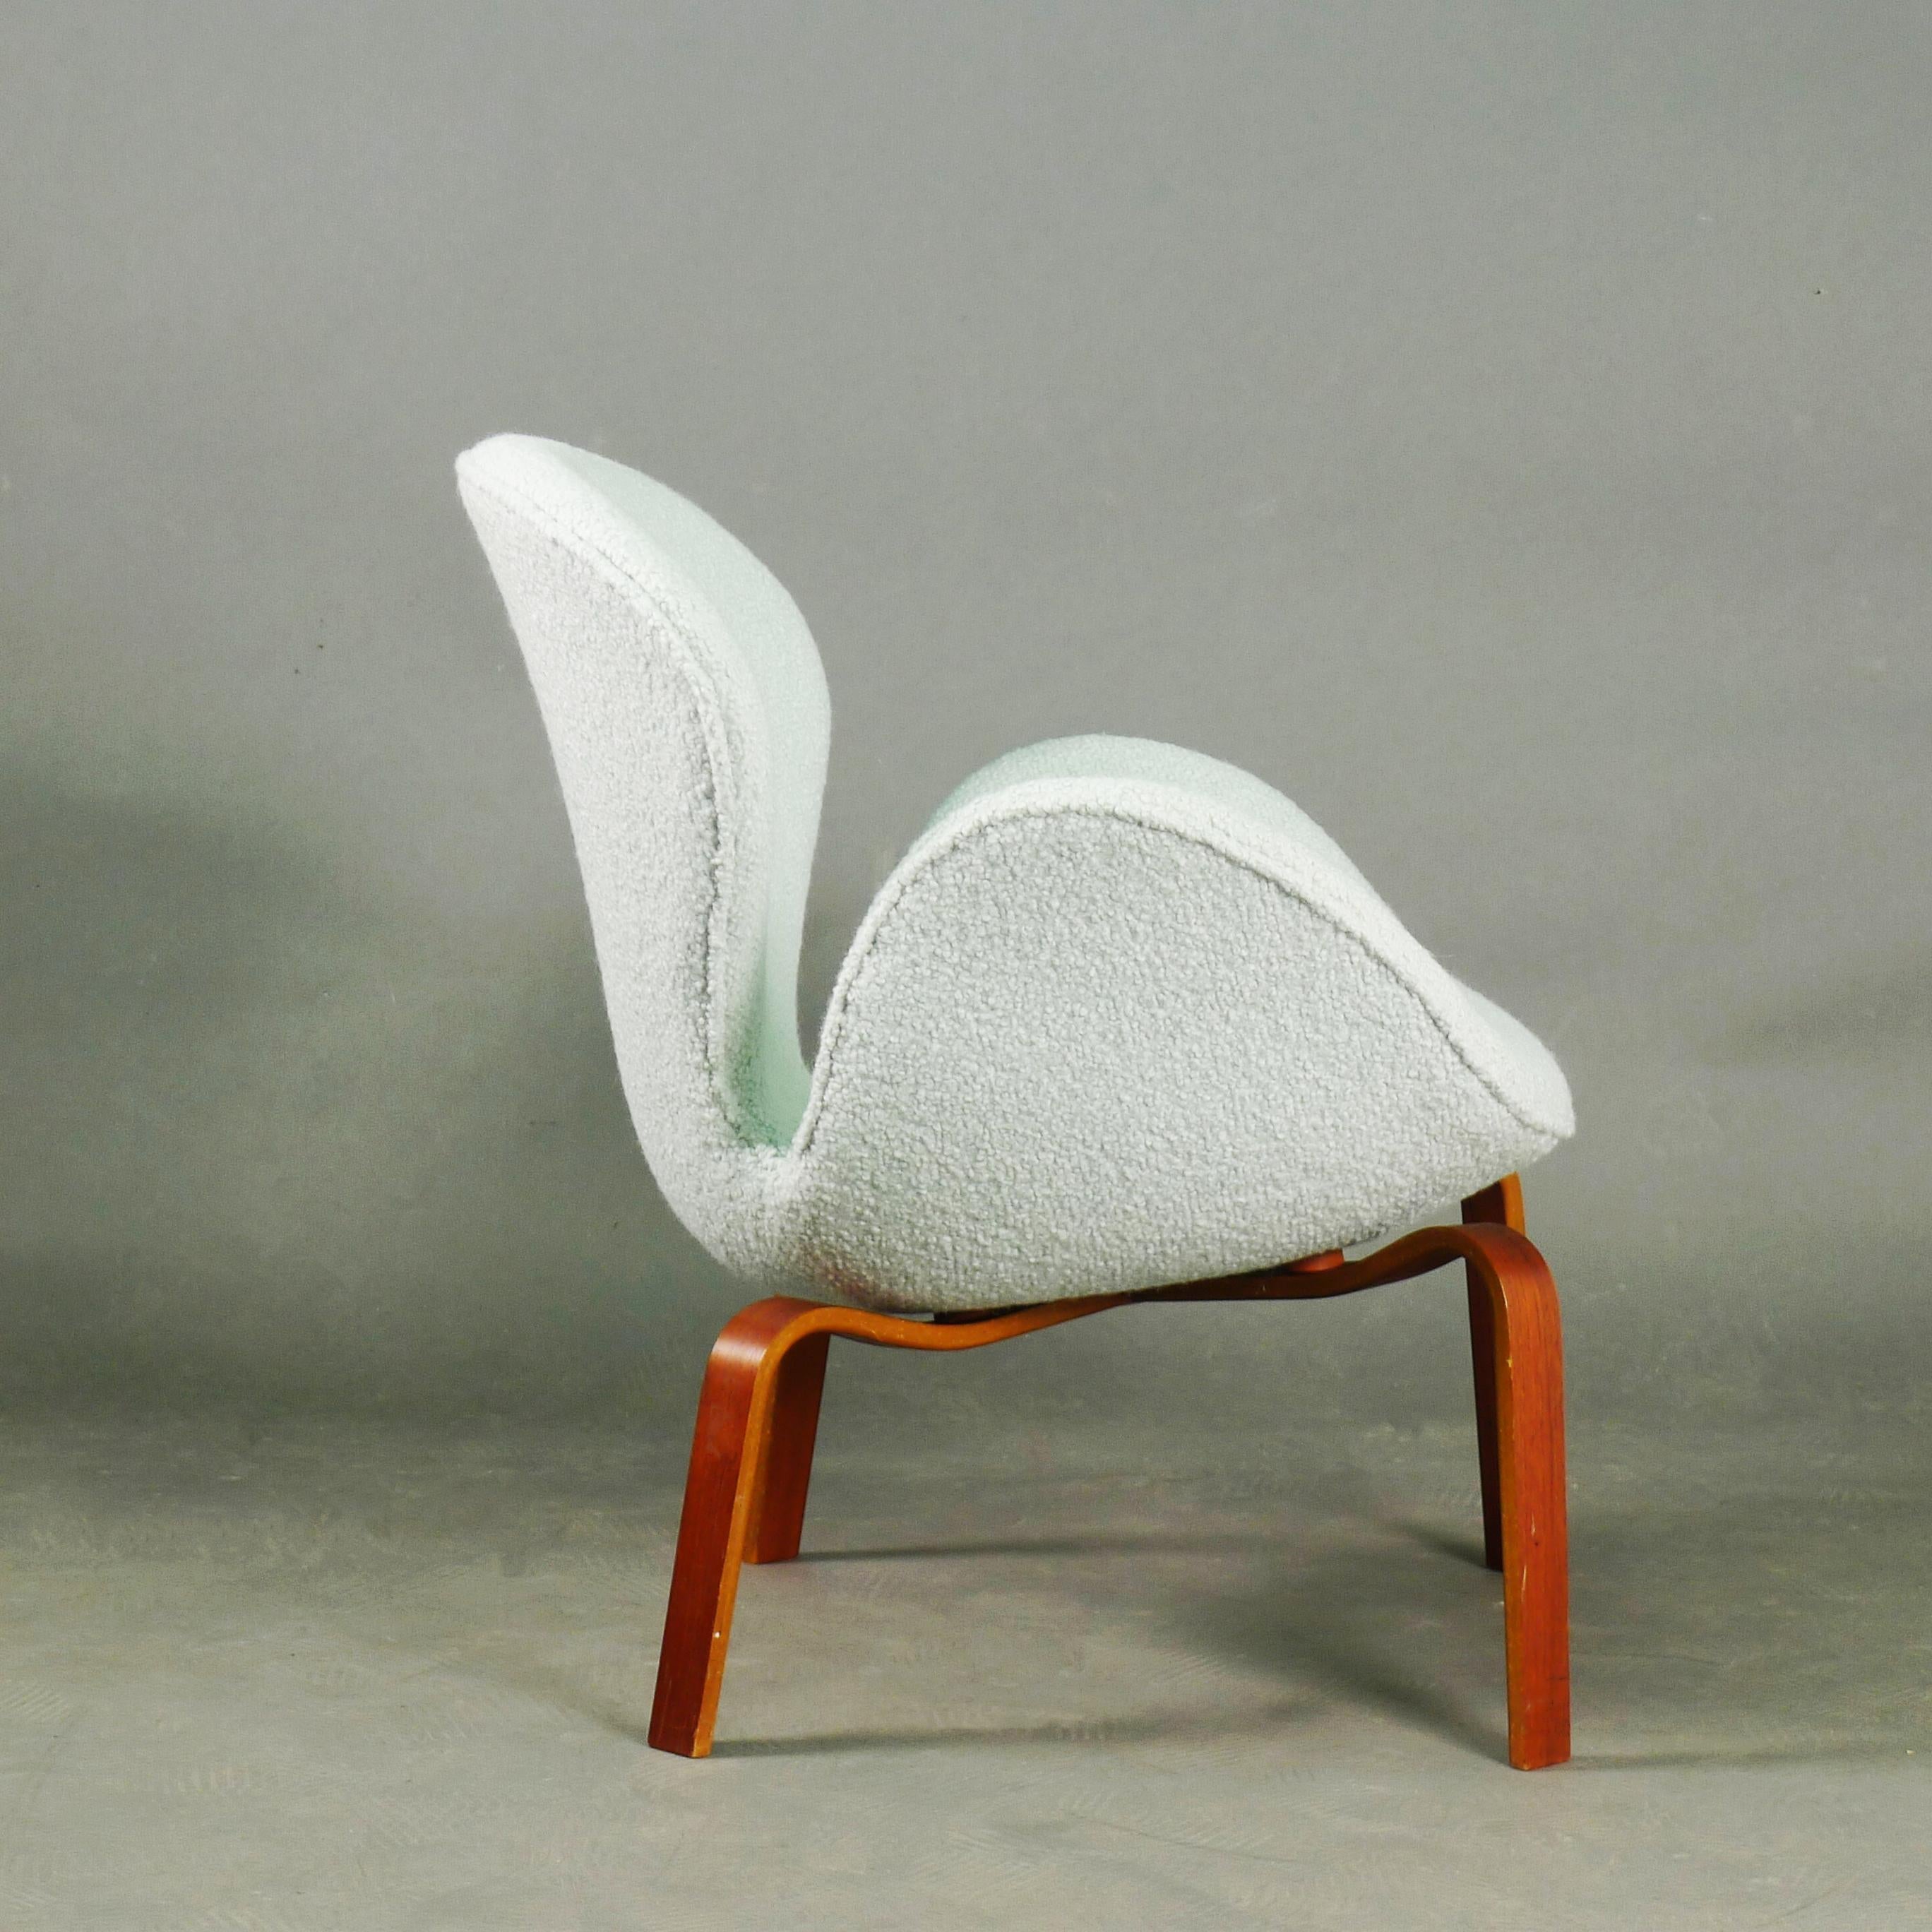 Rare original Swan chair designed by Arne Jacobsen and manufactured by Fritz Hansen in Copenhagen, Denmark.  

For a limited period in the 1960s, a small number of Swan chairs were produced with wooden legs, rather than chrome swivel bases, and they